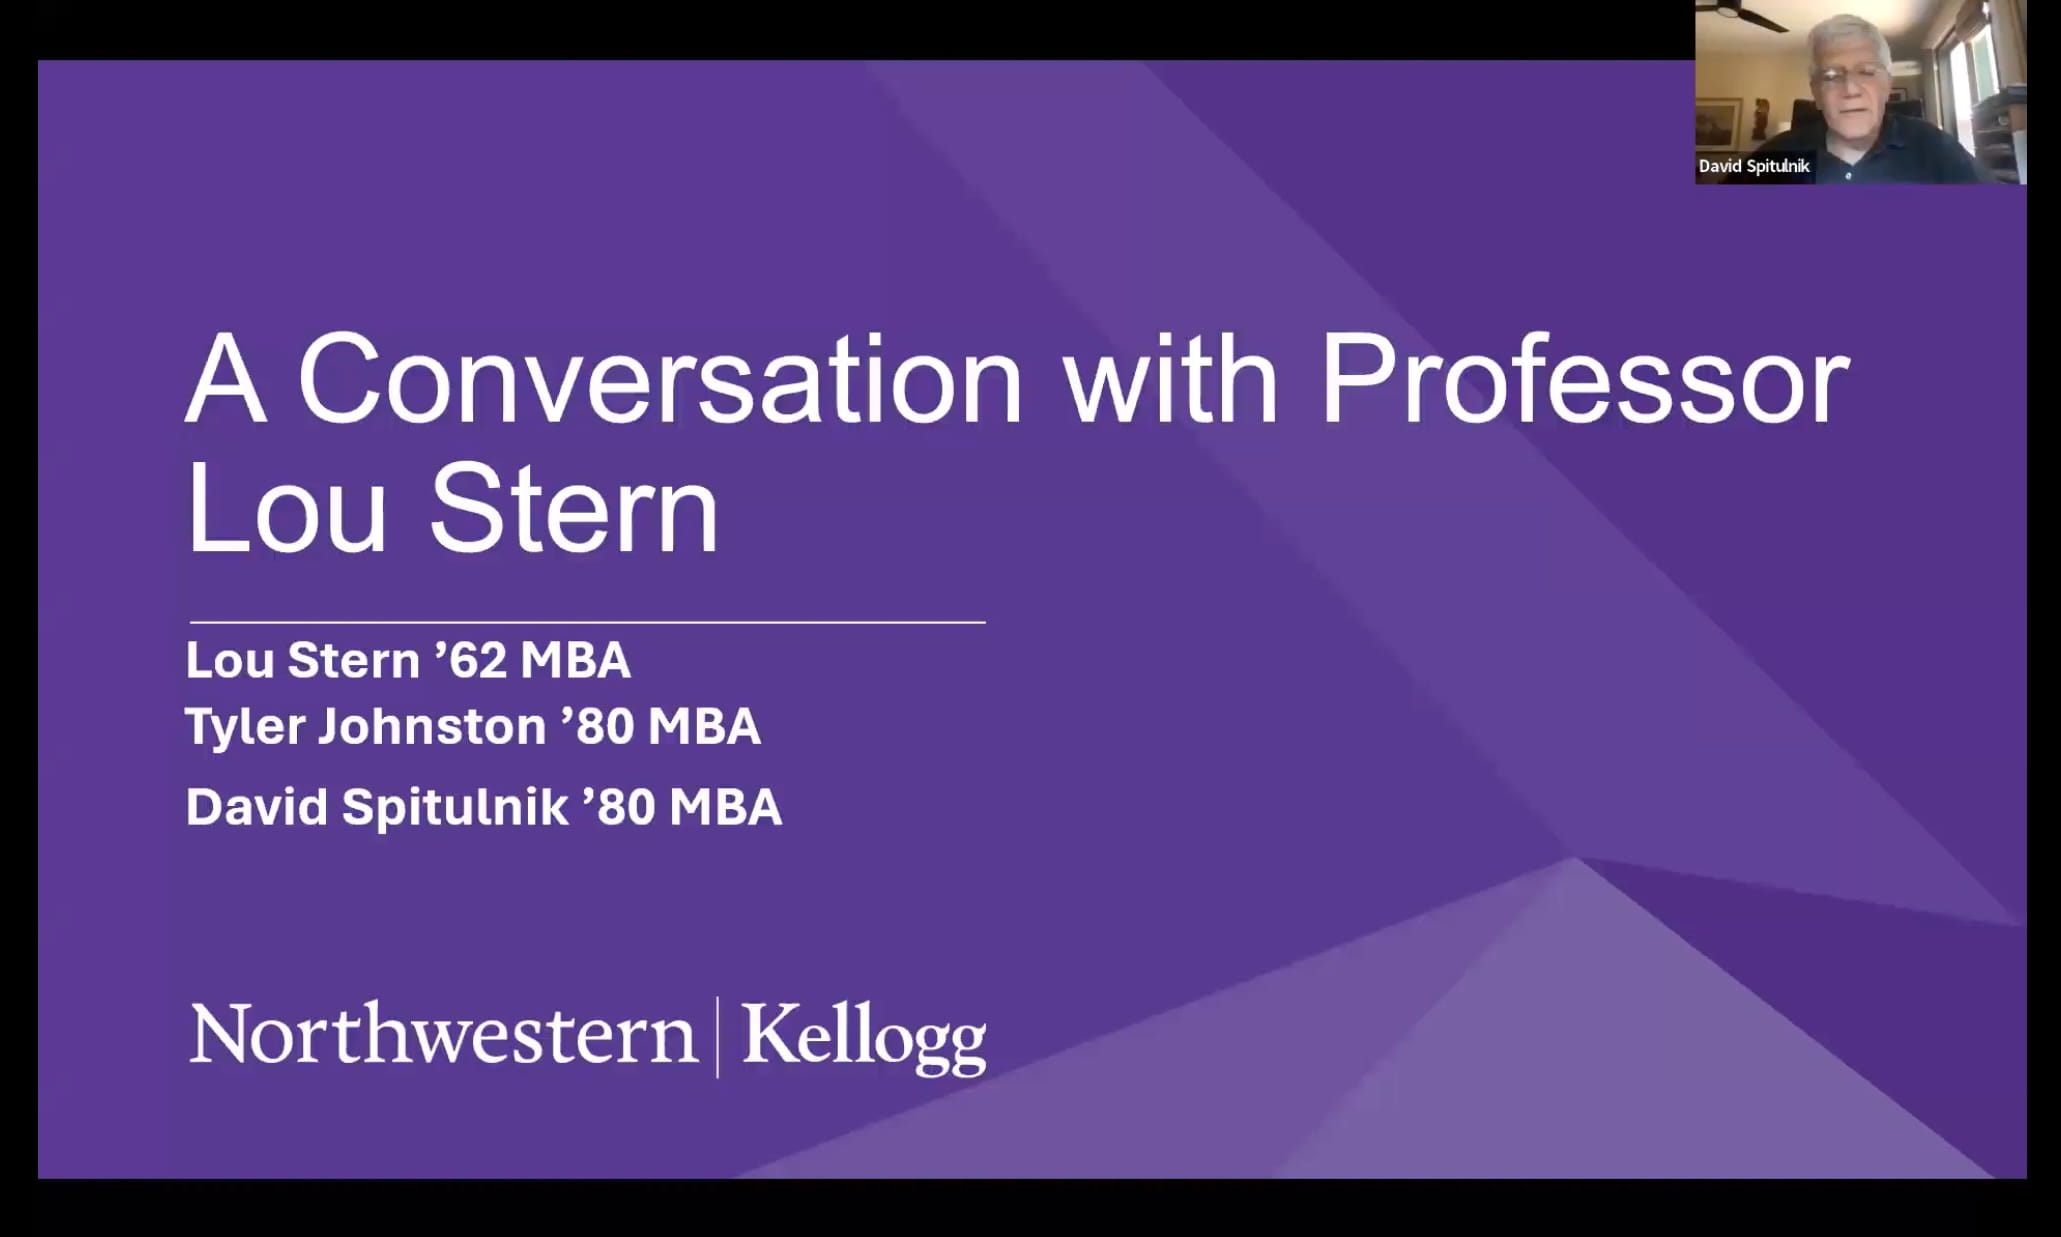 A conversation with professor Lou Stern video title card